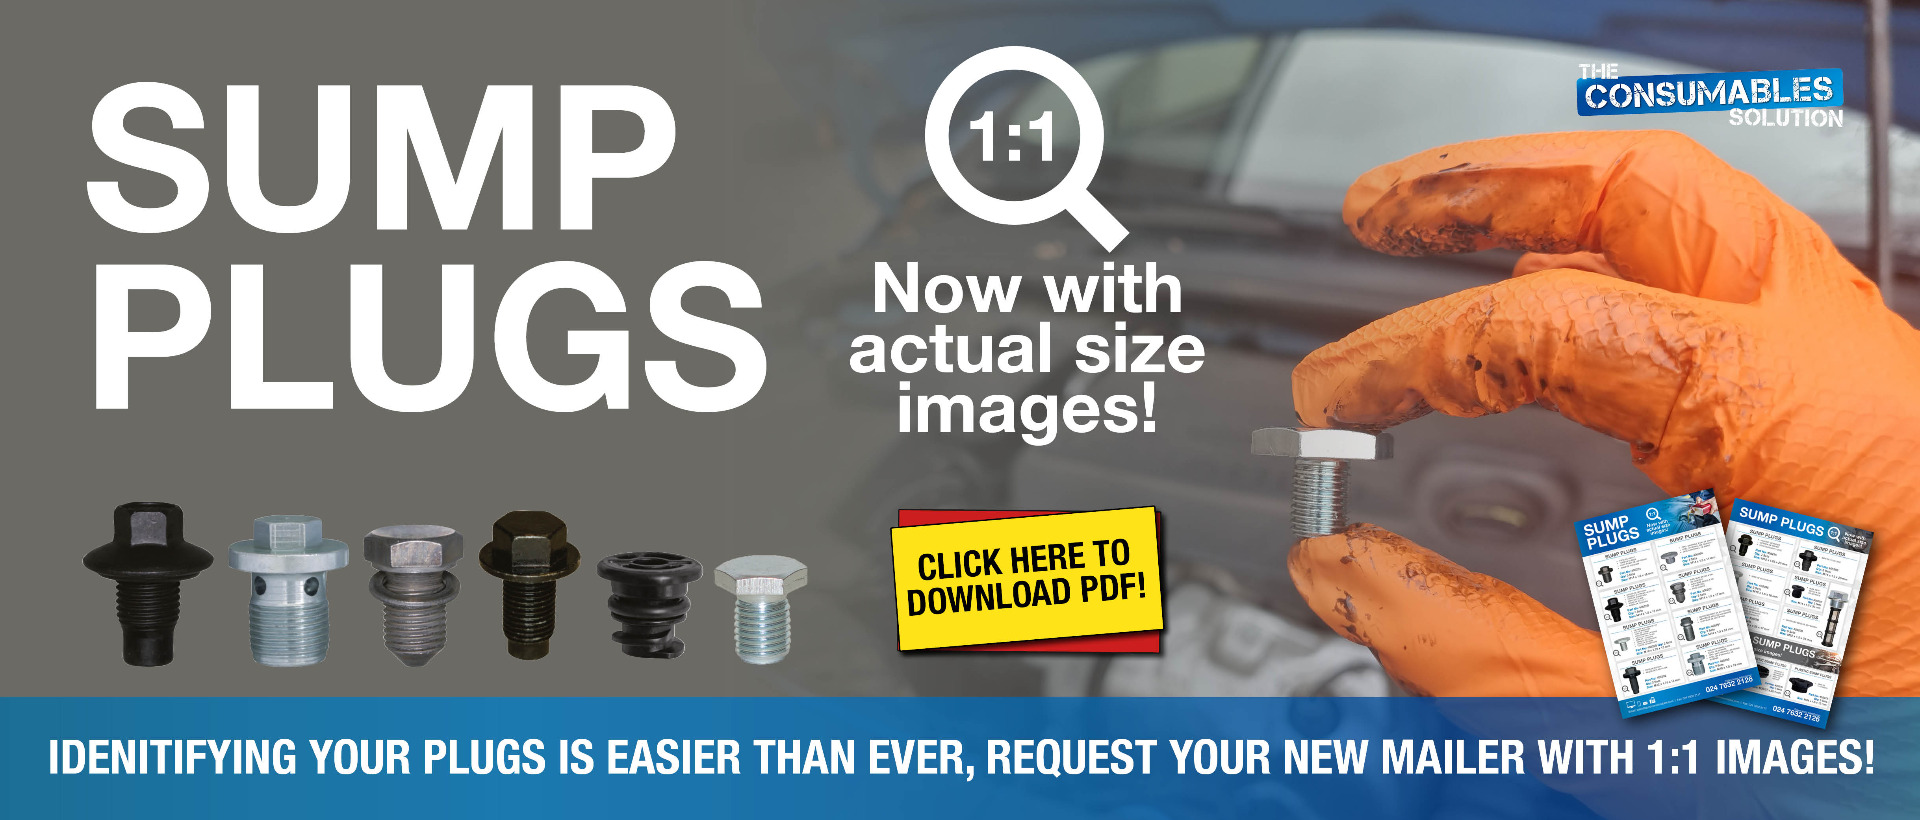 Sump Plugs 1:1 - Now with actual size images. Identifying your plugs is easier than ever. Request your new mailer with 1:1 images. Click here to download PDF!